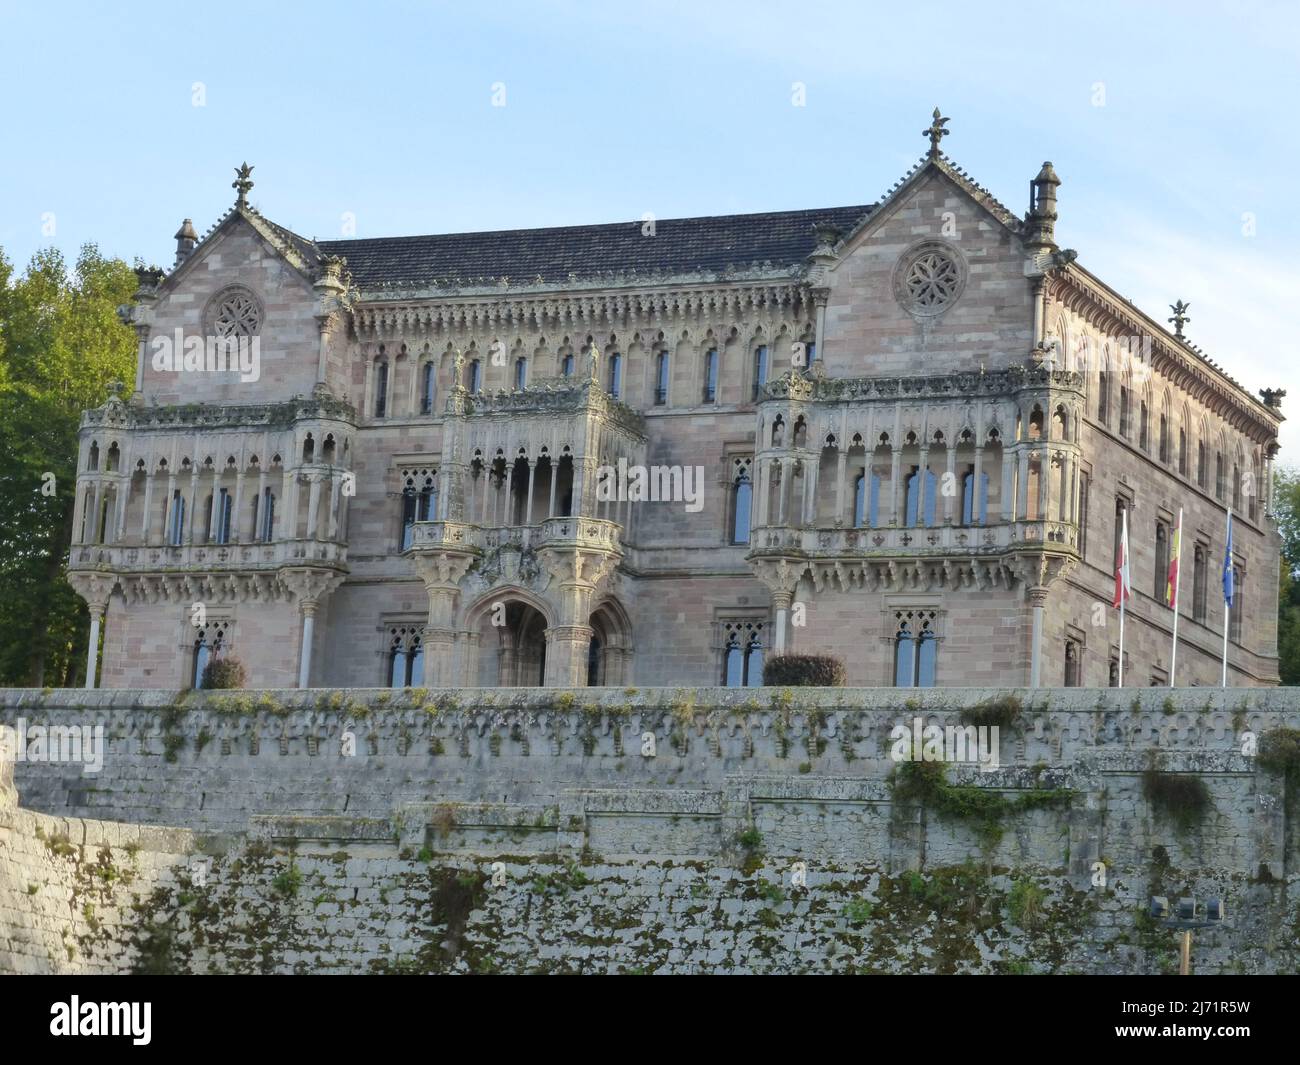 Comillas, Cantabrian municipality famous for its palace and Gaudi's caprice. Spain. Stock Photo